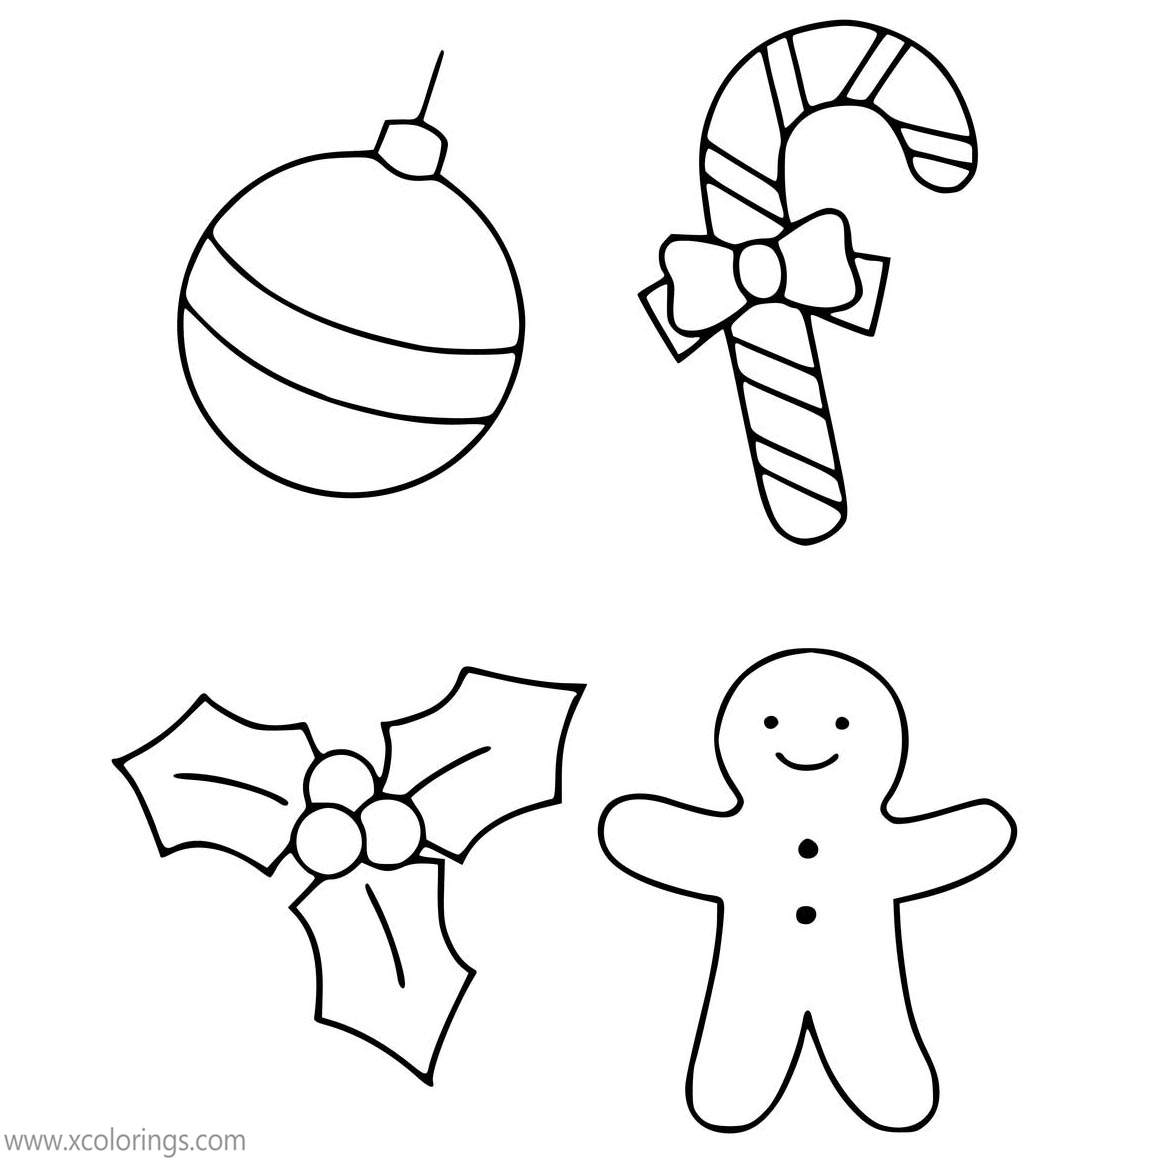 Free Christmas Ornament Coloring Pages Holly Gingerbread Man Candy Cane printable